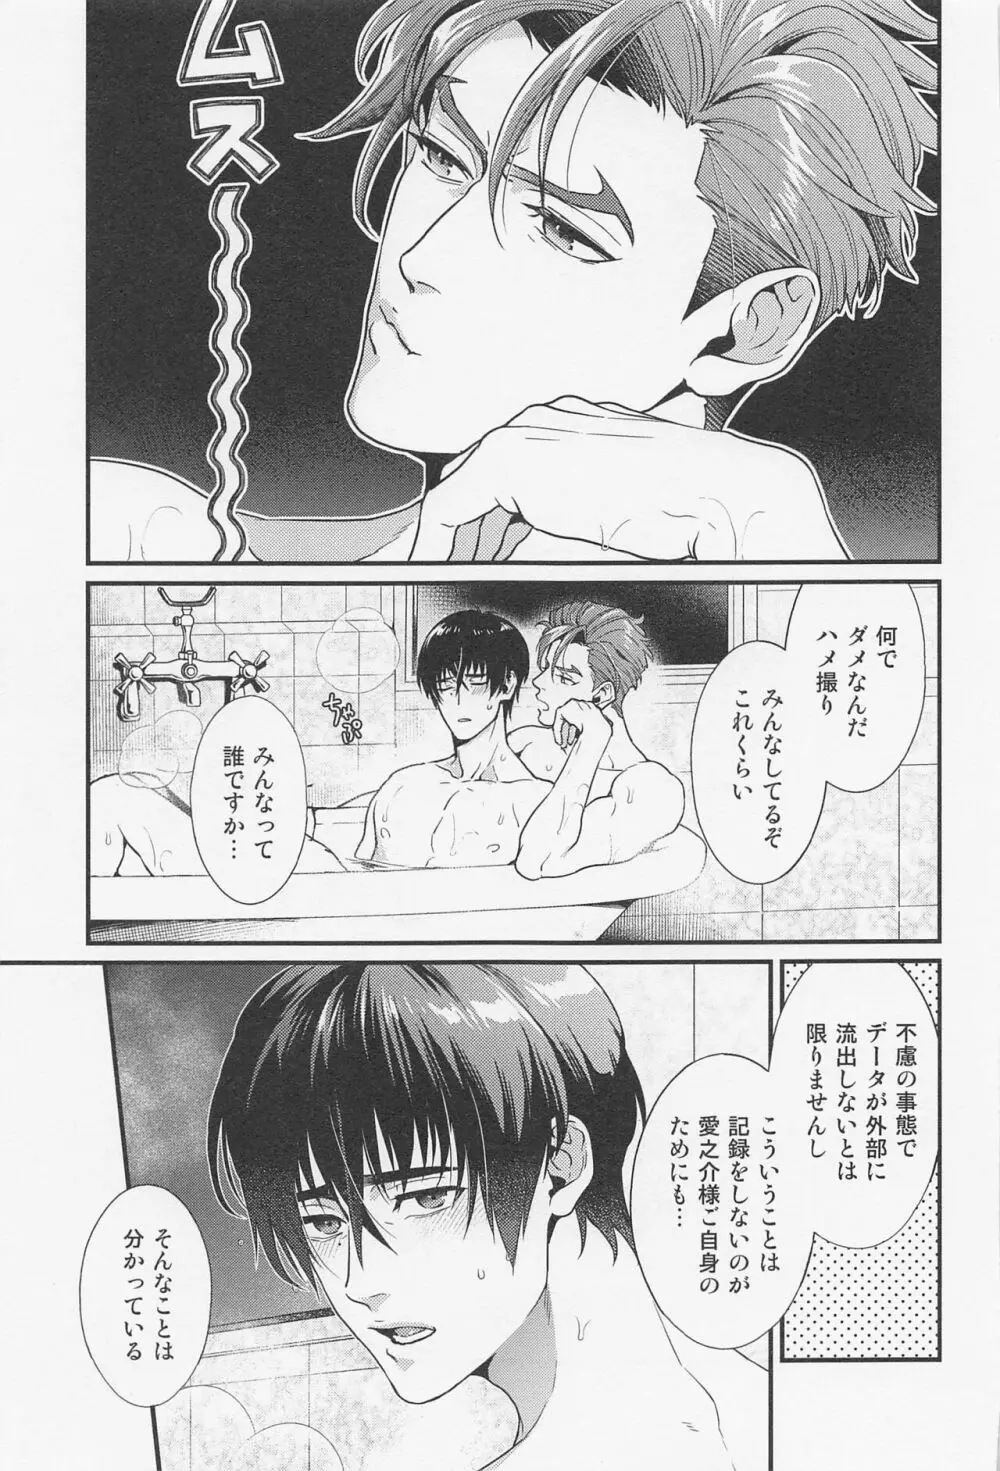 LOVE FIXED POINT - 愛の定点観測 Page.30